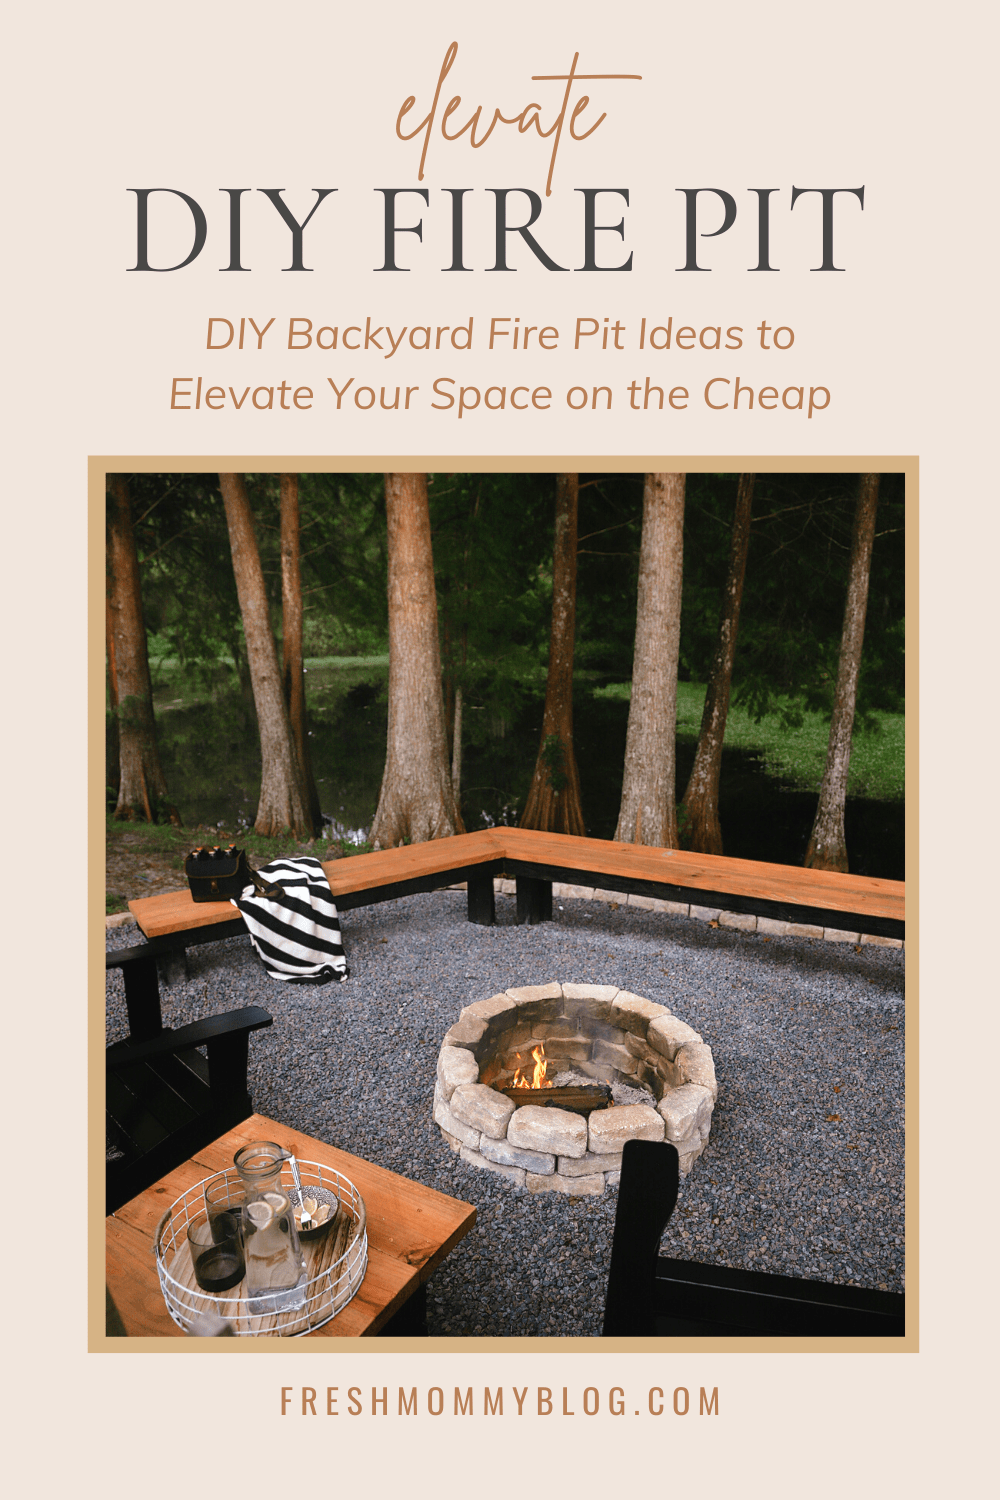 DIY Backyard Fire Pit Ideas to Elevate Your Space on the Cheap! Do you want to create the ideal outdoor space without spending a lot of cash? We needed to do something about our weedy backyard. So, we decided to tackle it with a few budget fire pit and backyard design ideas on the cheap.